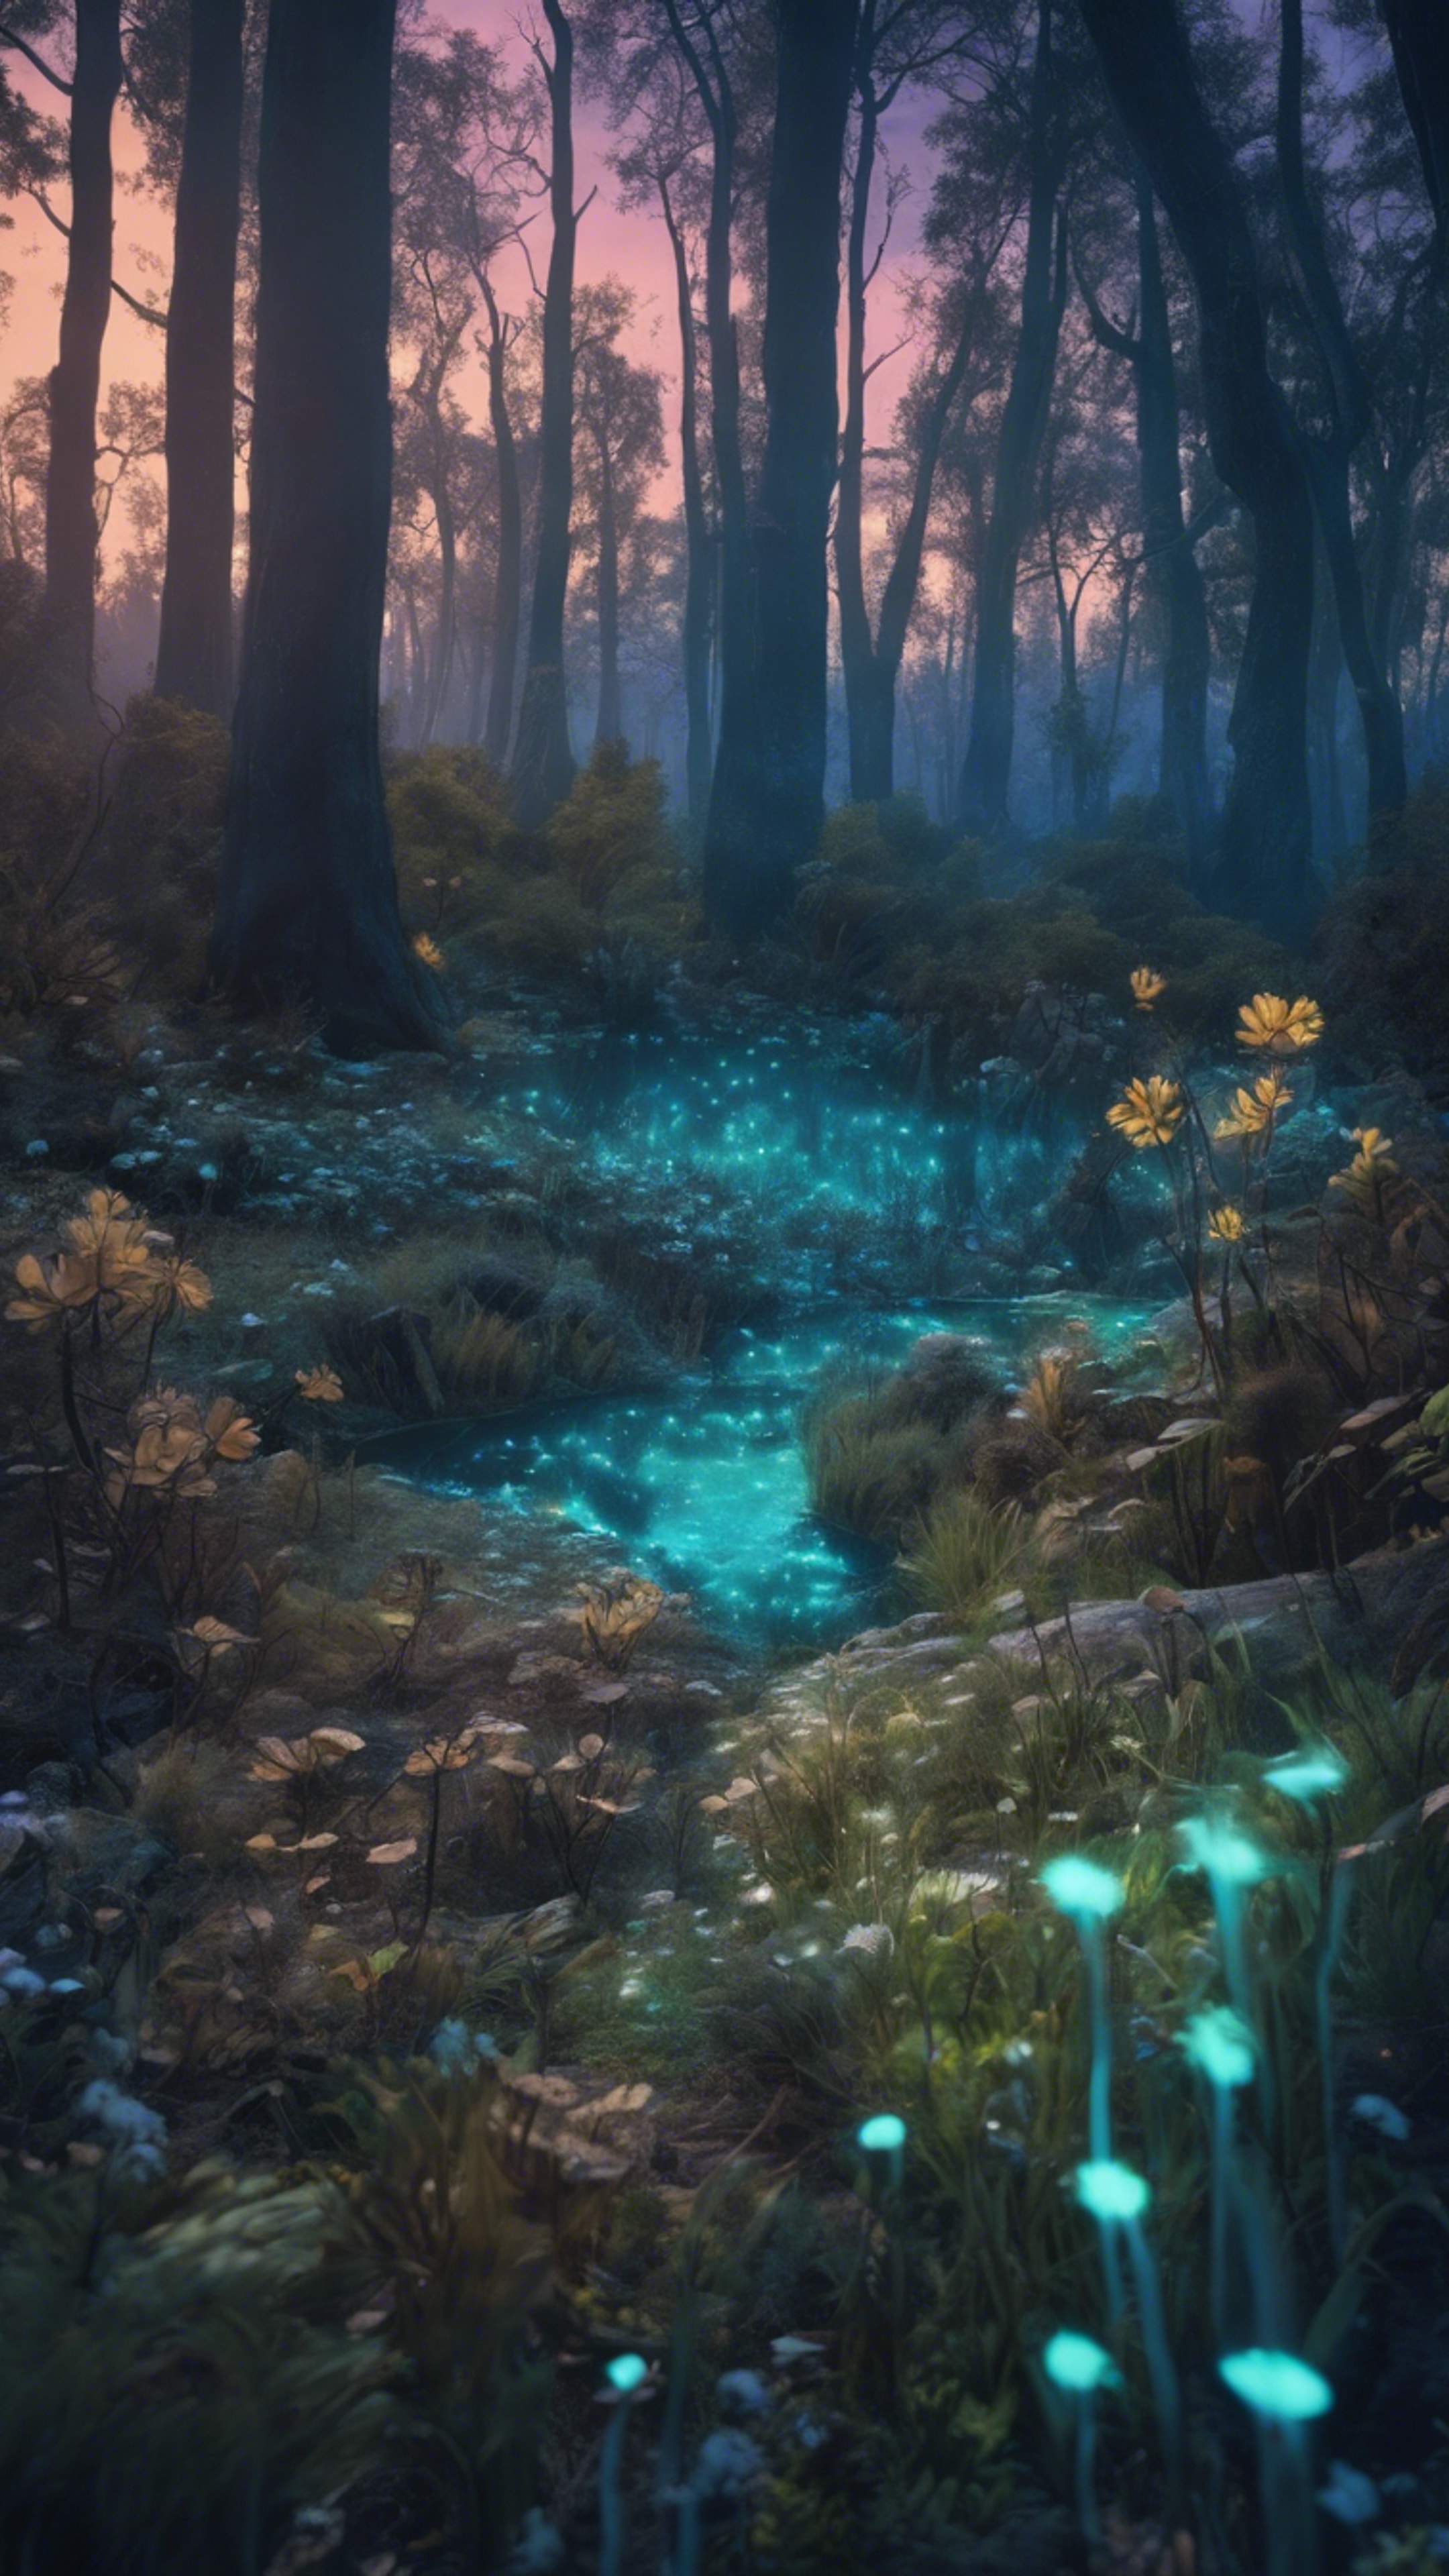 A magical landscape with bioluminescent flora and fauna, painting a beautifully eerie picture within a twilight forest.壁紙[f4bdf3edf4f4493b8357]